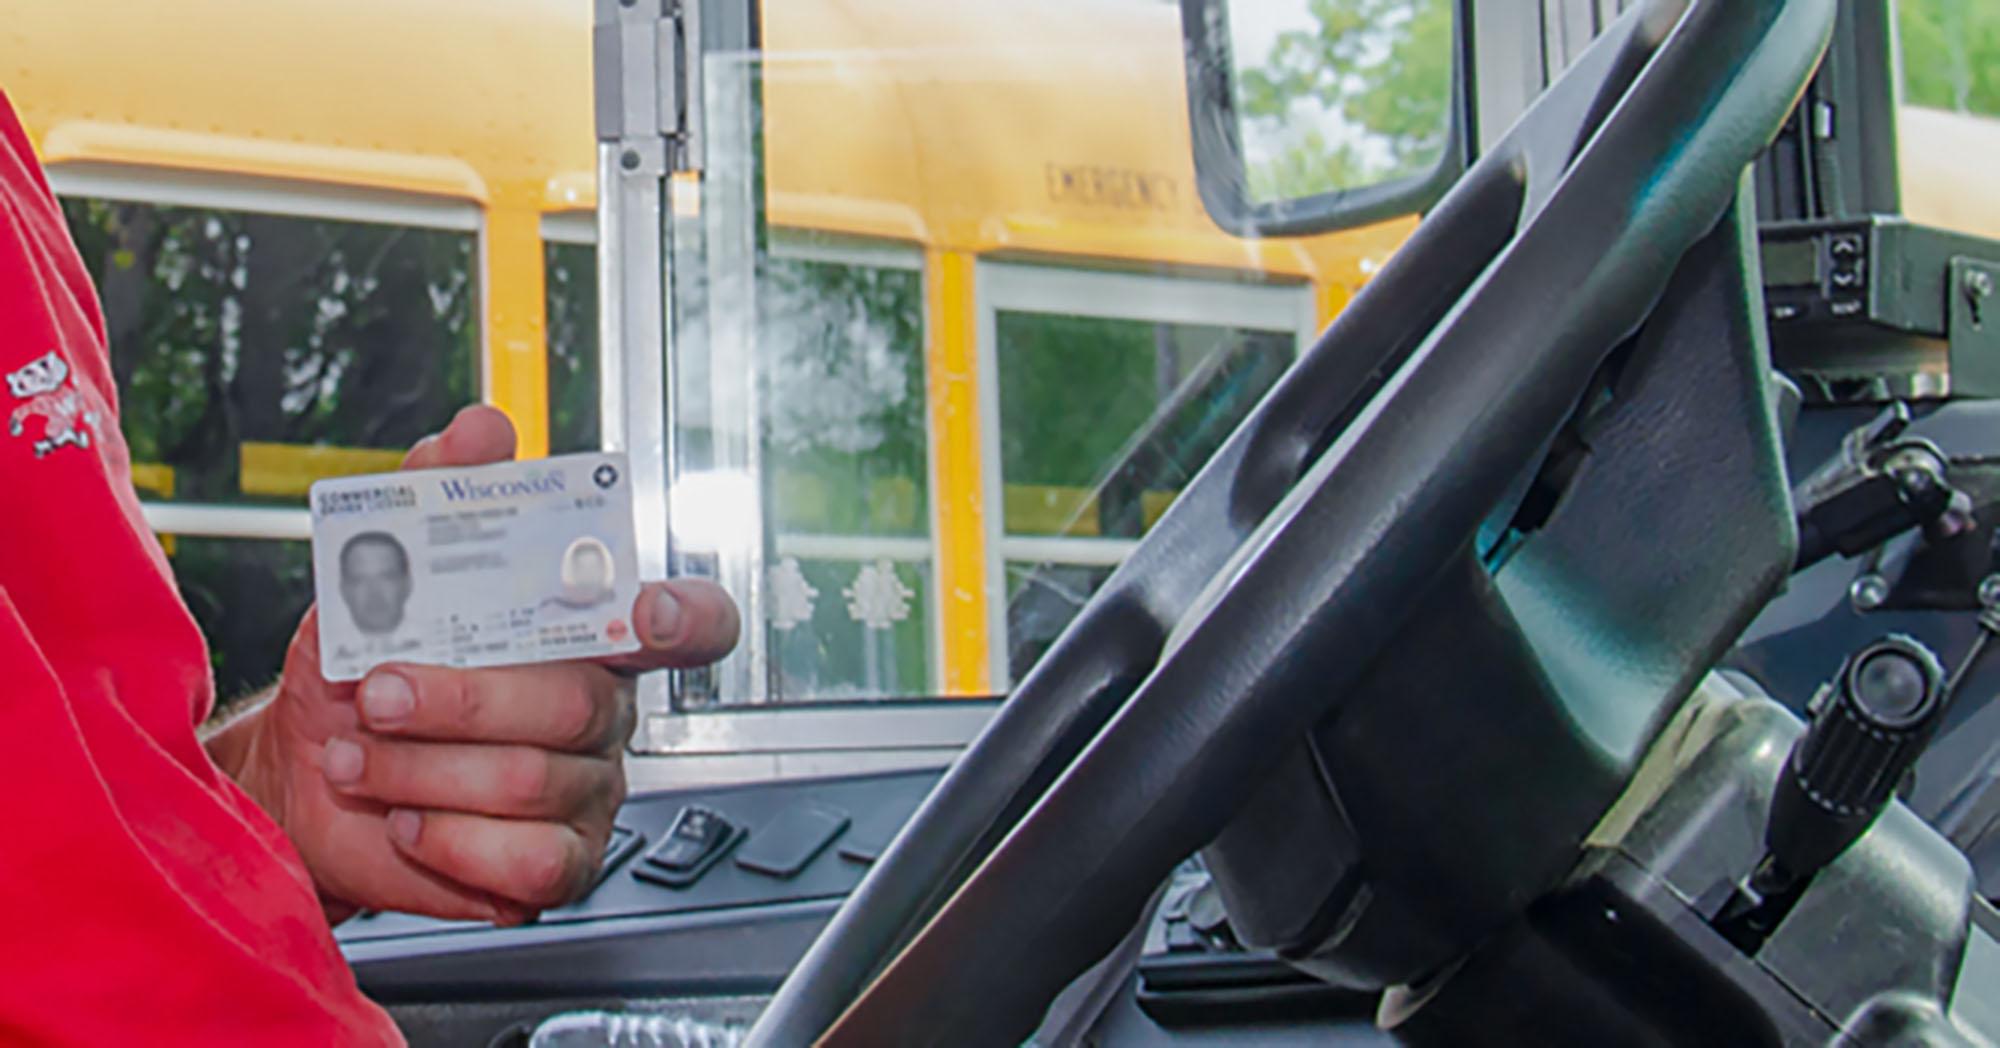 A bus driver holds their bus ID while in the driver's seat of a school bus